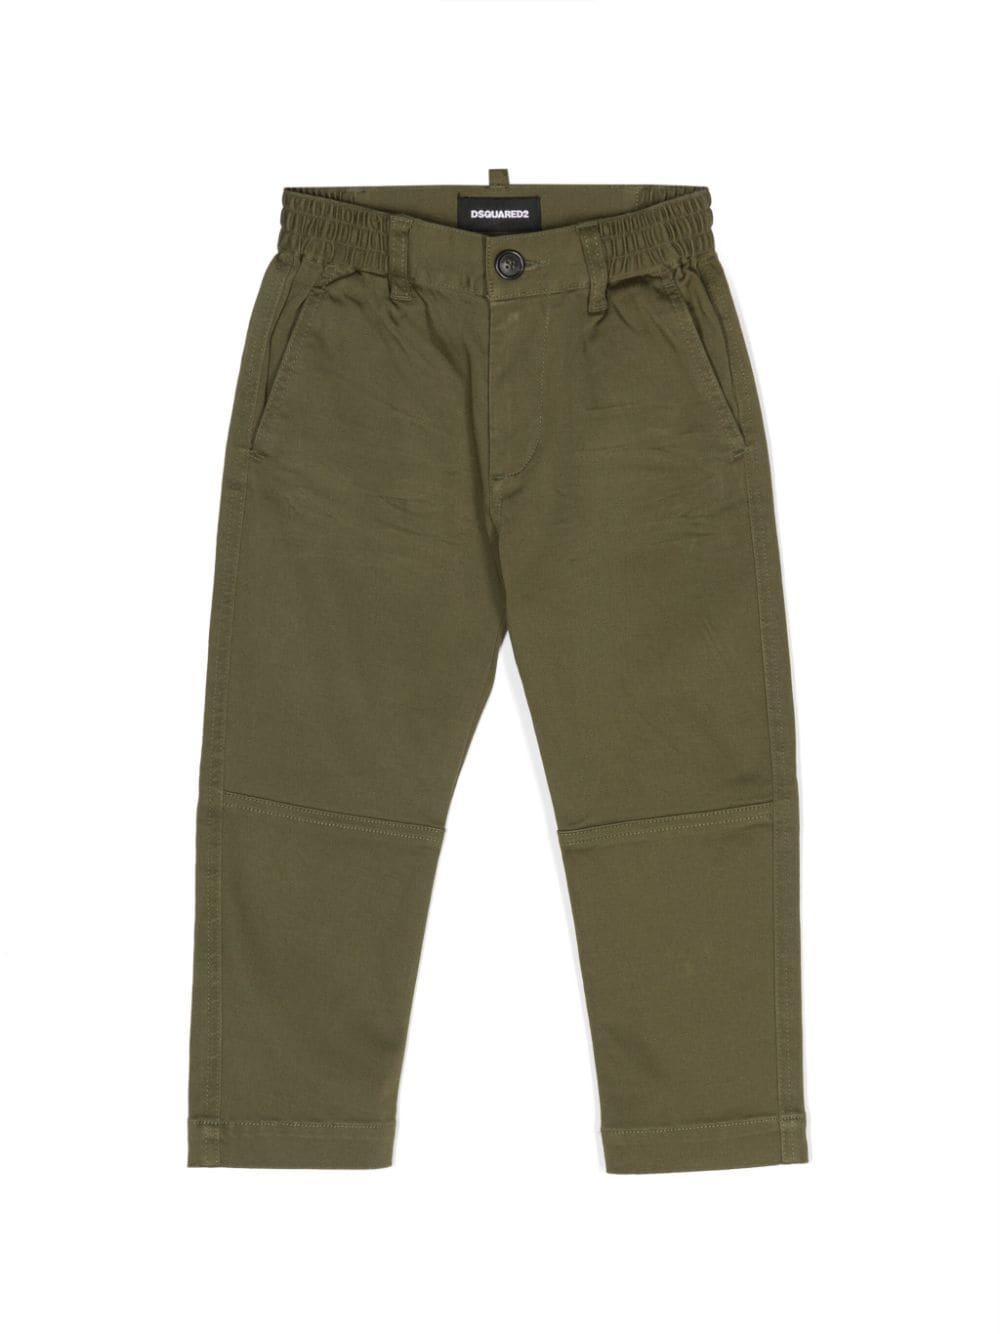 DSQUARED2 KIDS tapered chino trousers - Green von DSQUARED2 KIDS